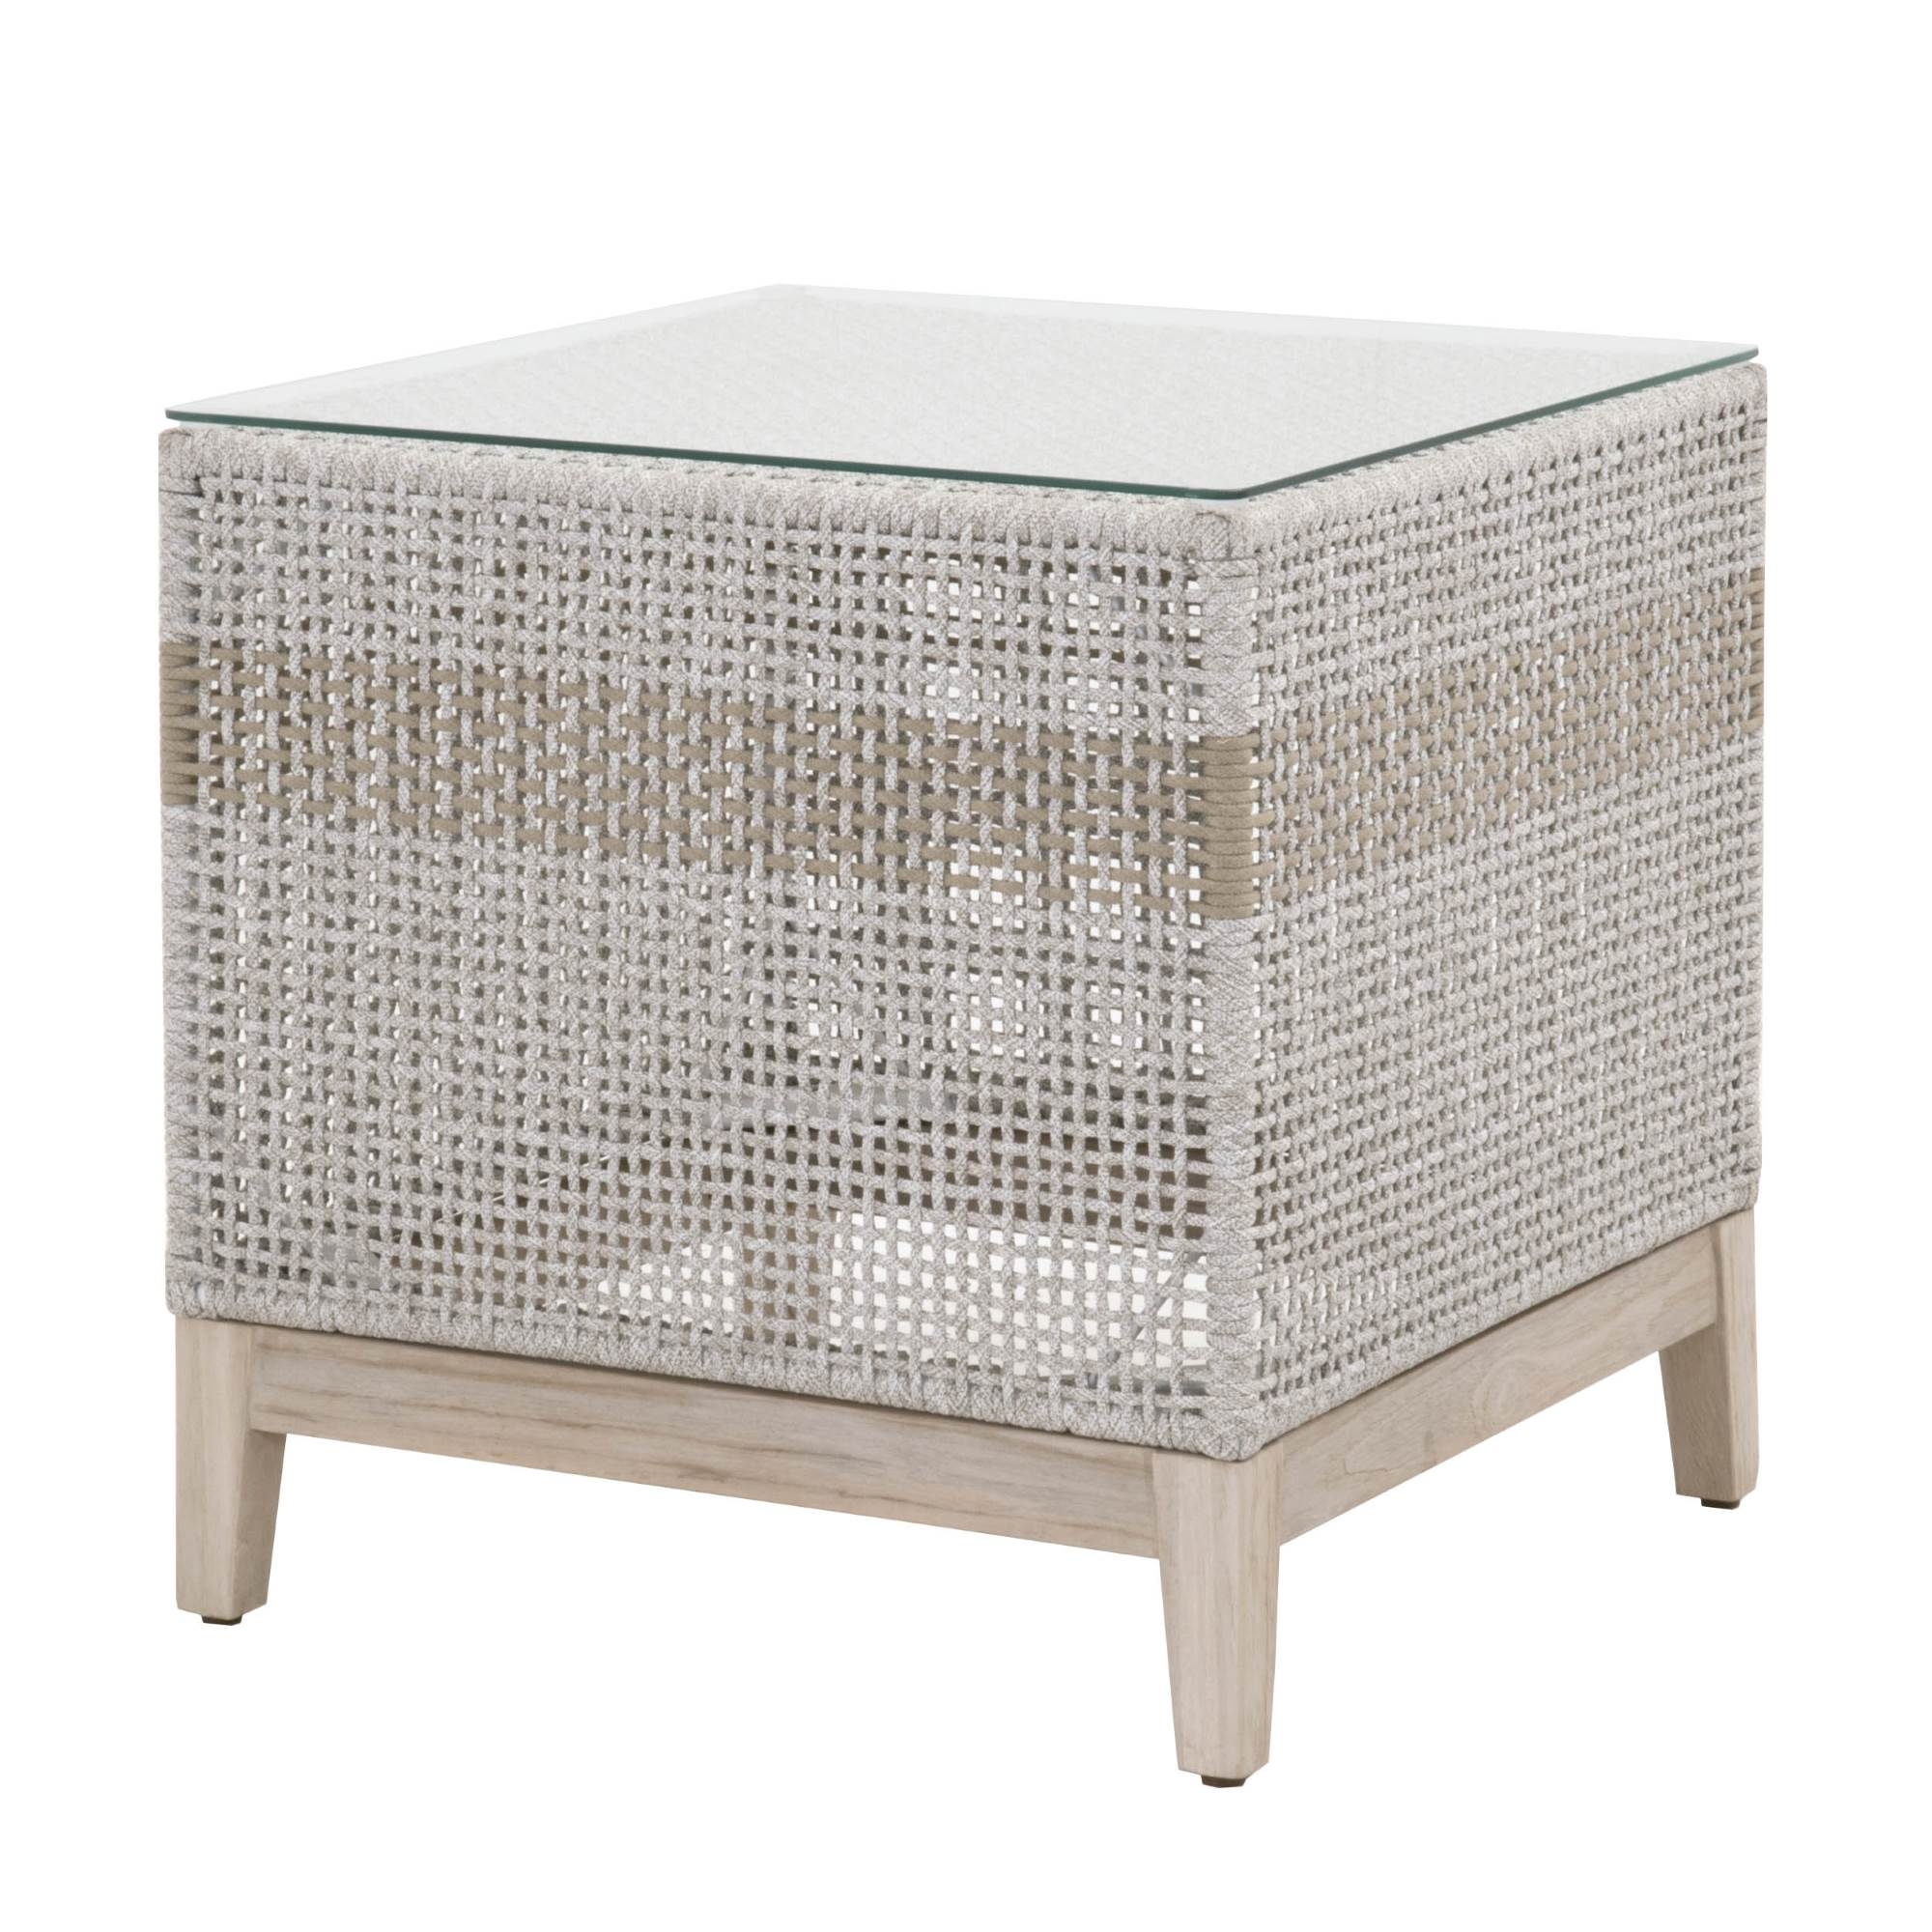 Tapestry Outdoor End Table - Image 1